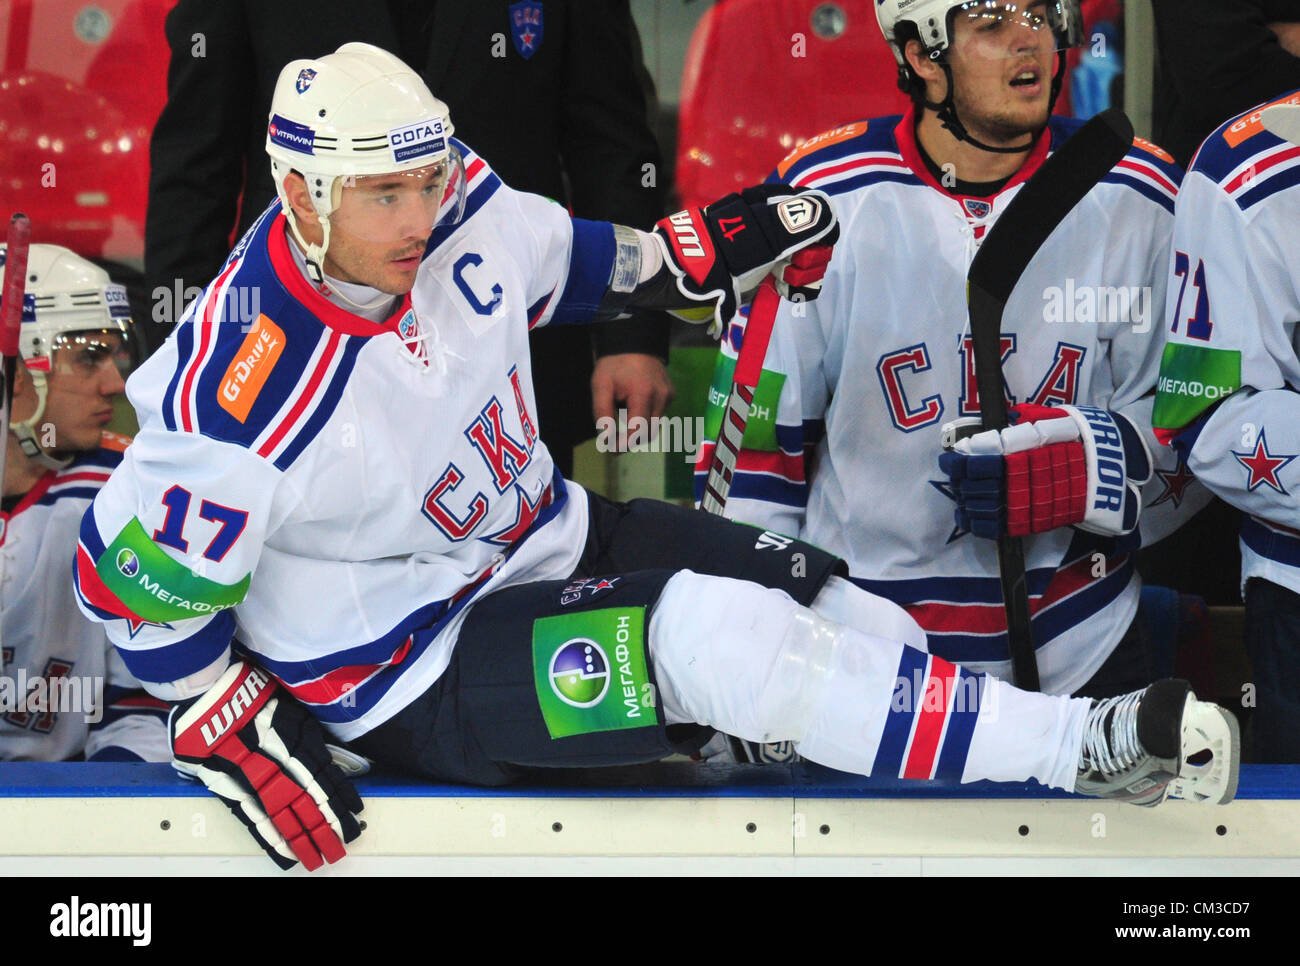 Oct. 3, 2012 - Moscow, Russia - Alex Ovechkin plays in KHL during